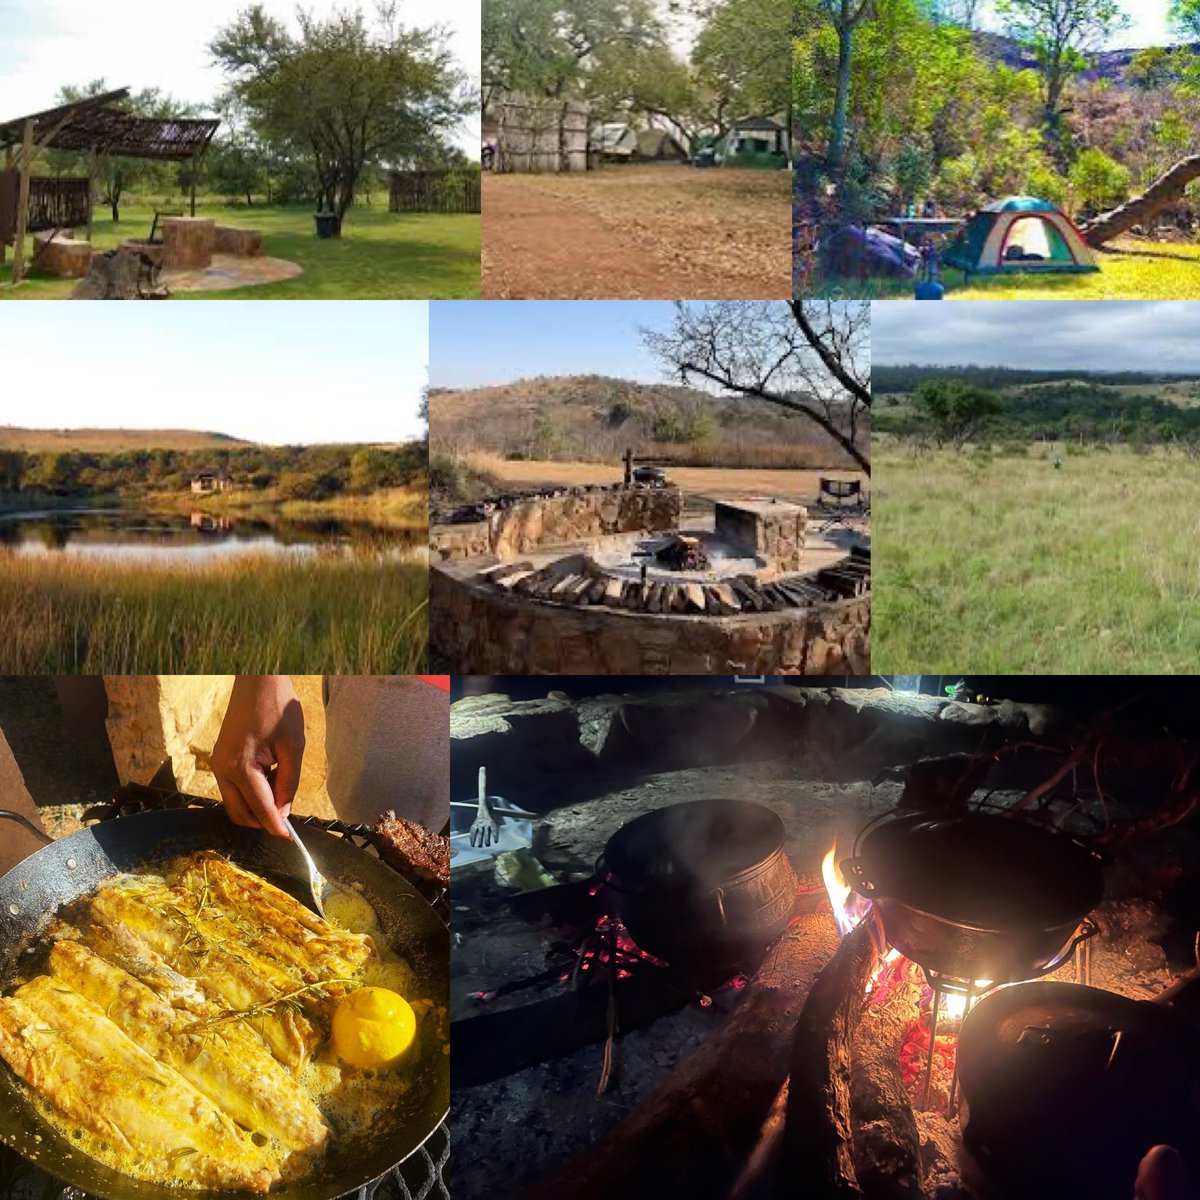 Next camp- 20 July 2024. Cullinan, A limited space were we can observe nature and just communicate over a fire. 

No music but less techological gadgets allowed. No electricity.